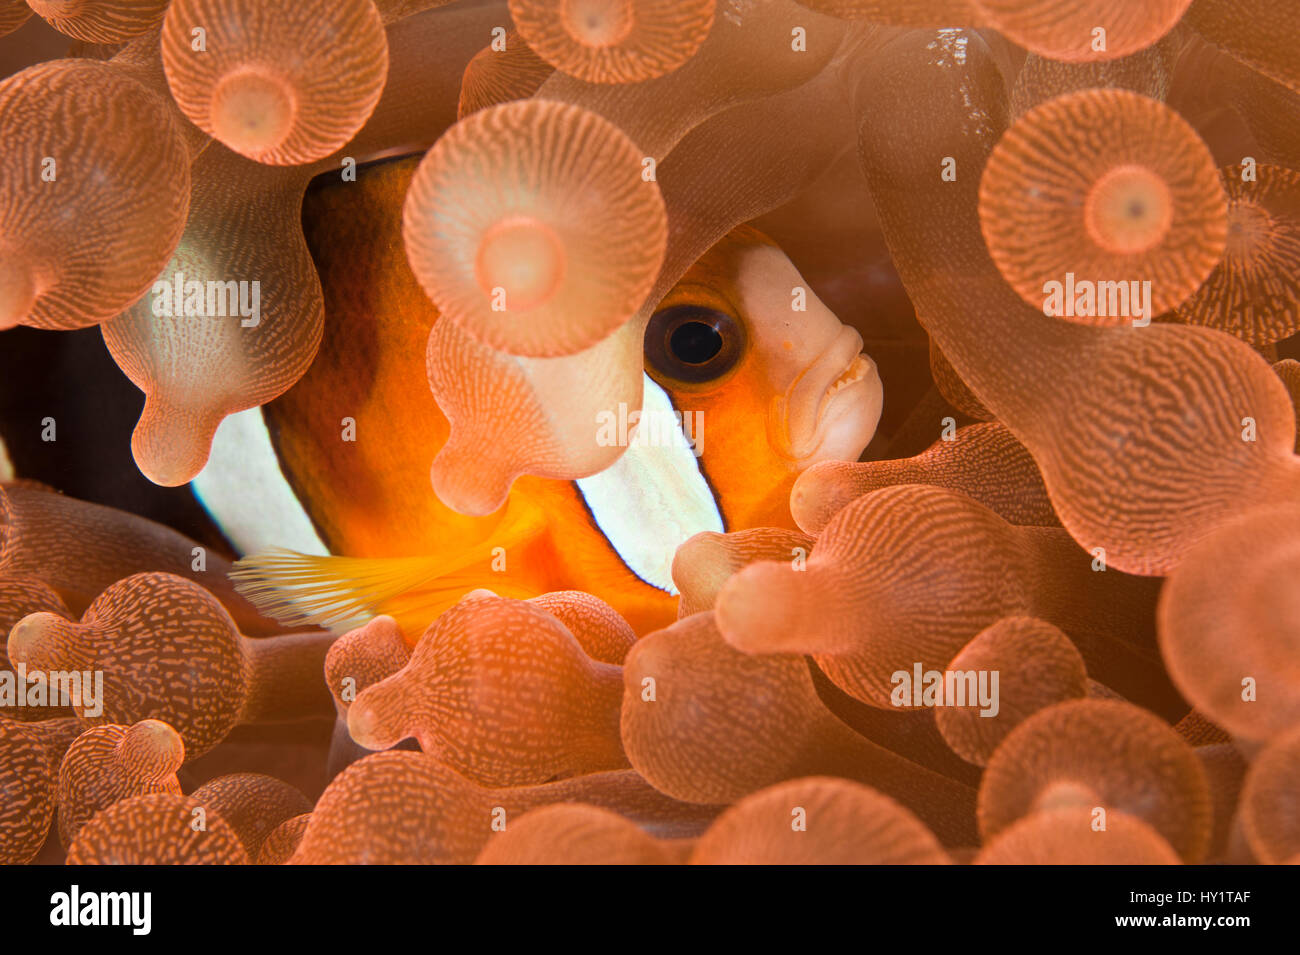 Clarke's anemonefish (Amphiprion clarkii) hiding among tentacles of Bulb sea anemone (Entacmaea quadricolor) Komodo National Park, Indonesia, Indo-pacific. Stock Photo